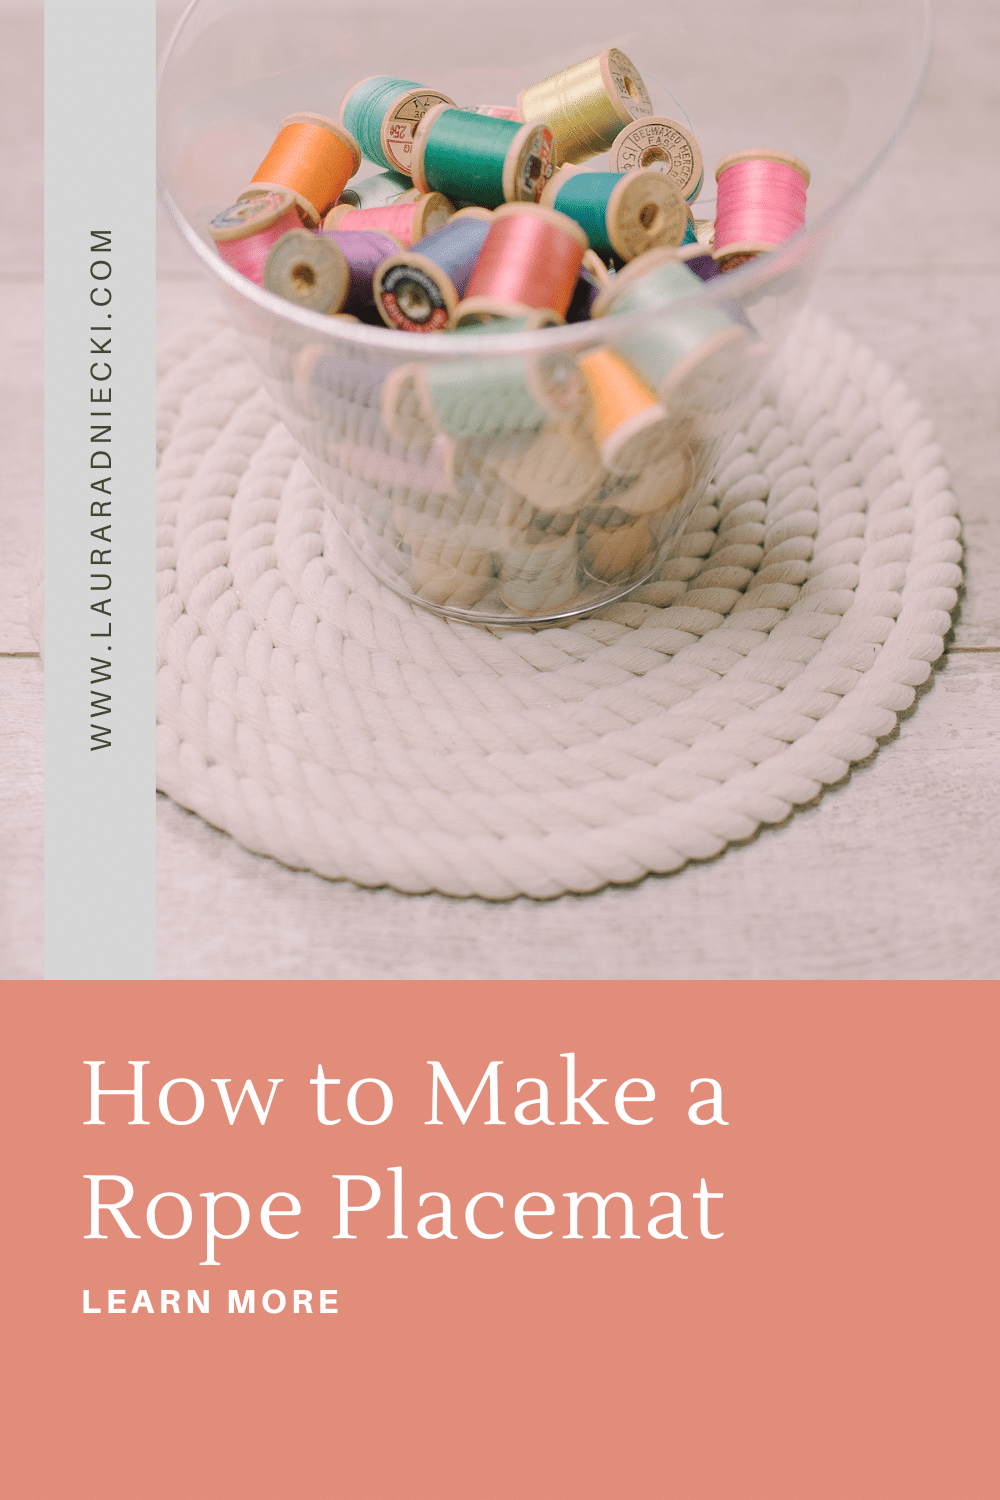 How to Make a Rope Placemat